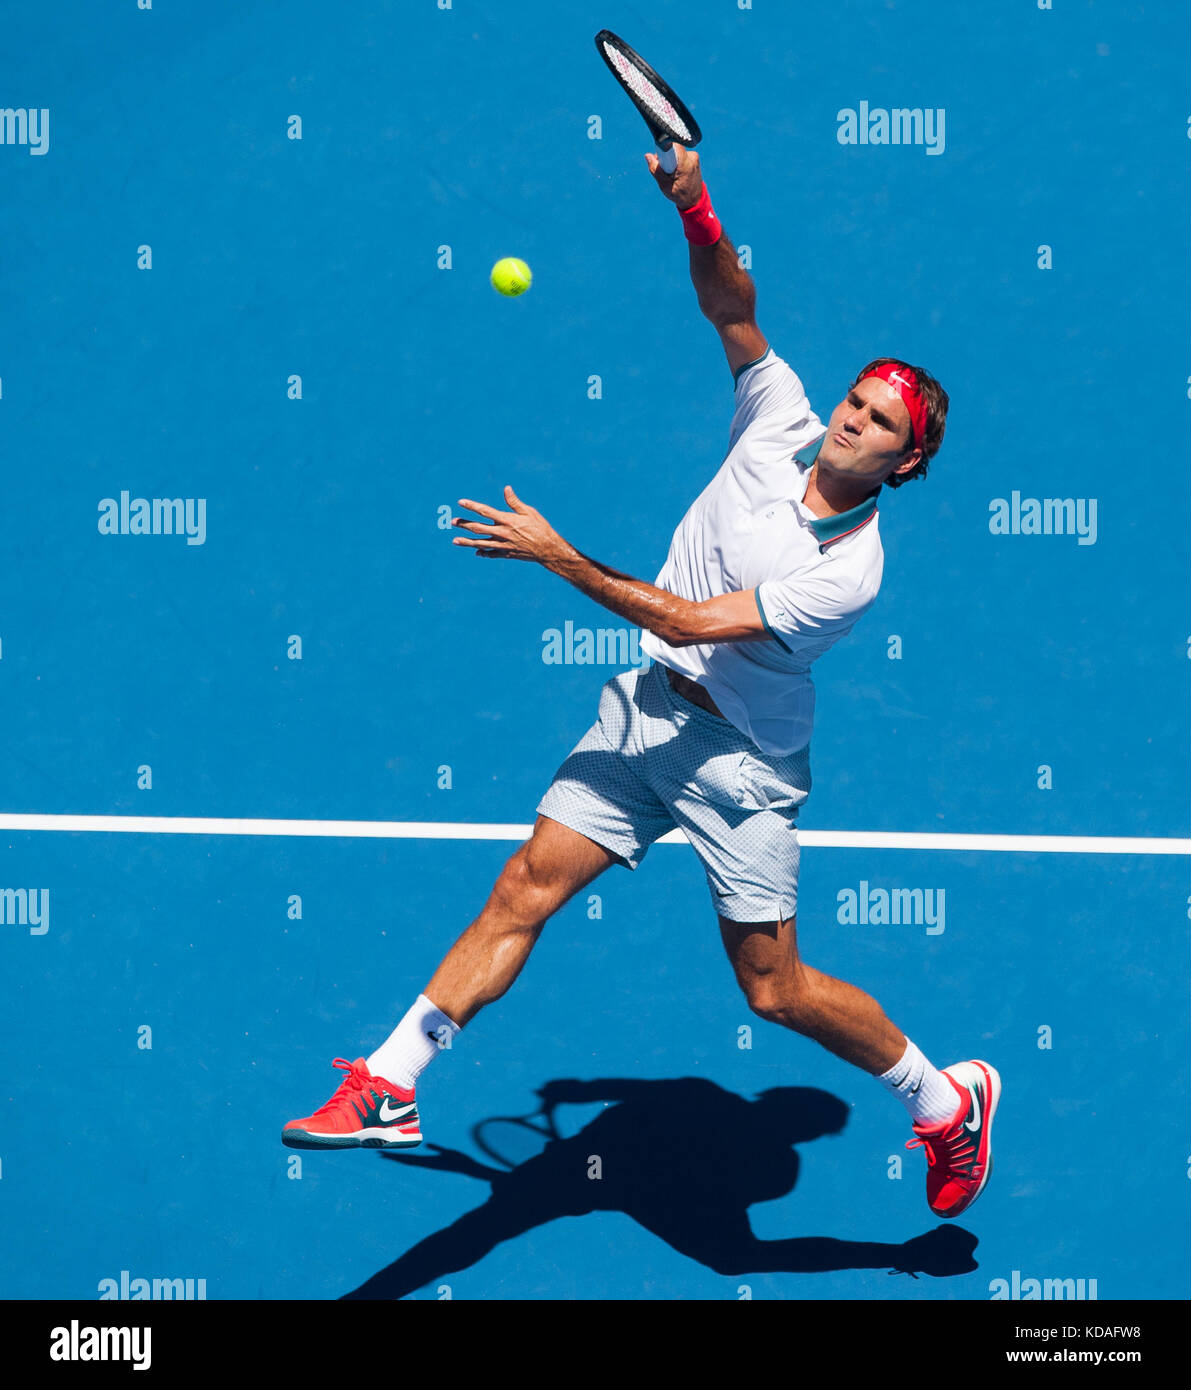 Roger Federer (SUI) in Day 2 of Australian Open play as temperatures soared  to 43C, 109.4F . Federer beat J. Duckworth (AUS) 6-4, 6-4,6-2 in first rou  Stock Photo - Alamy